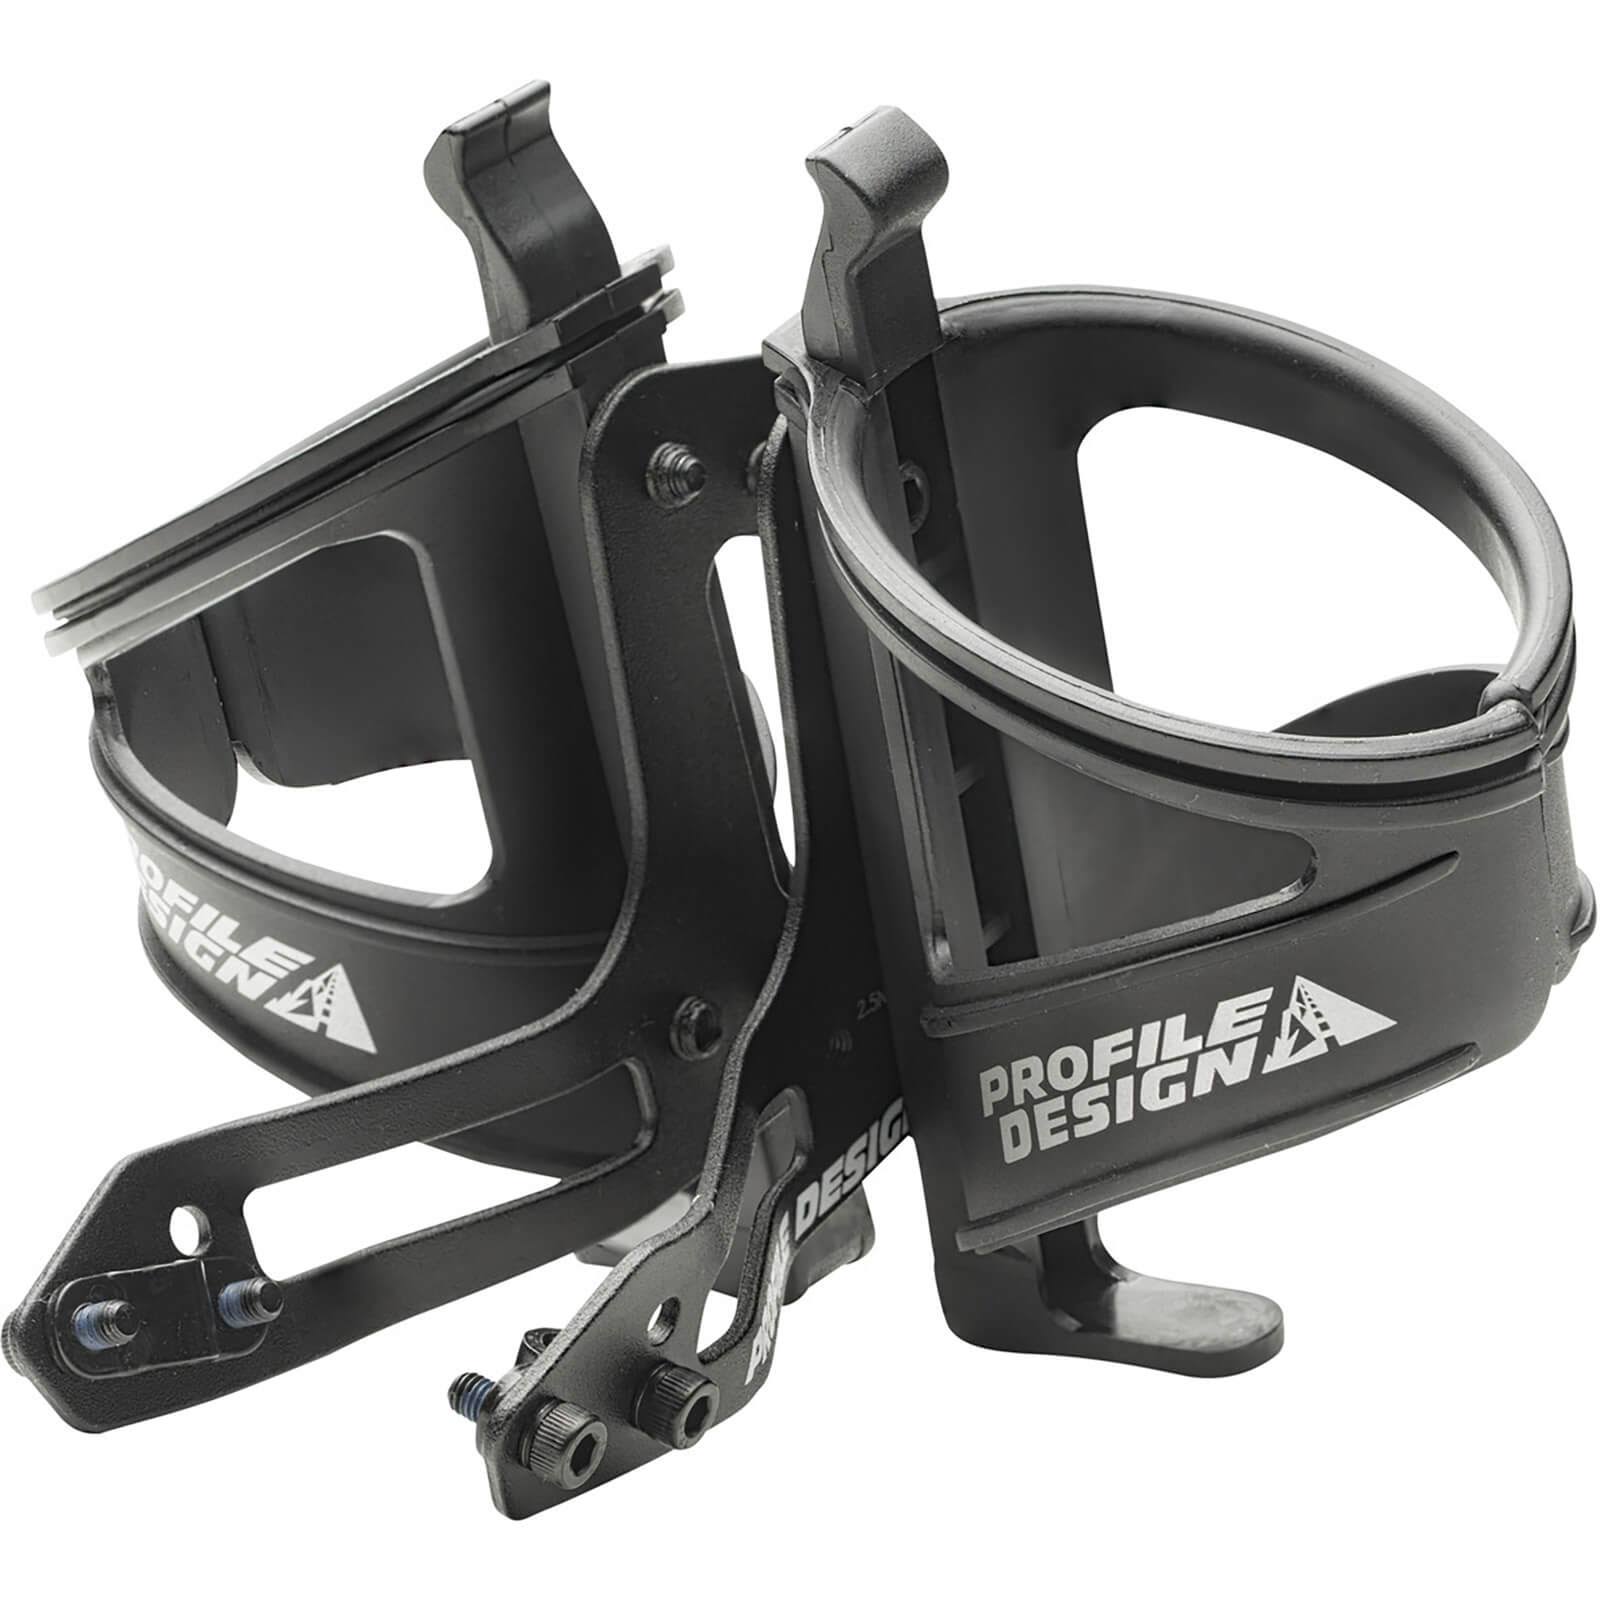 Profile Design RM-L Bicycle Water Bottle Cage System - Black